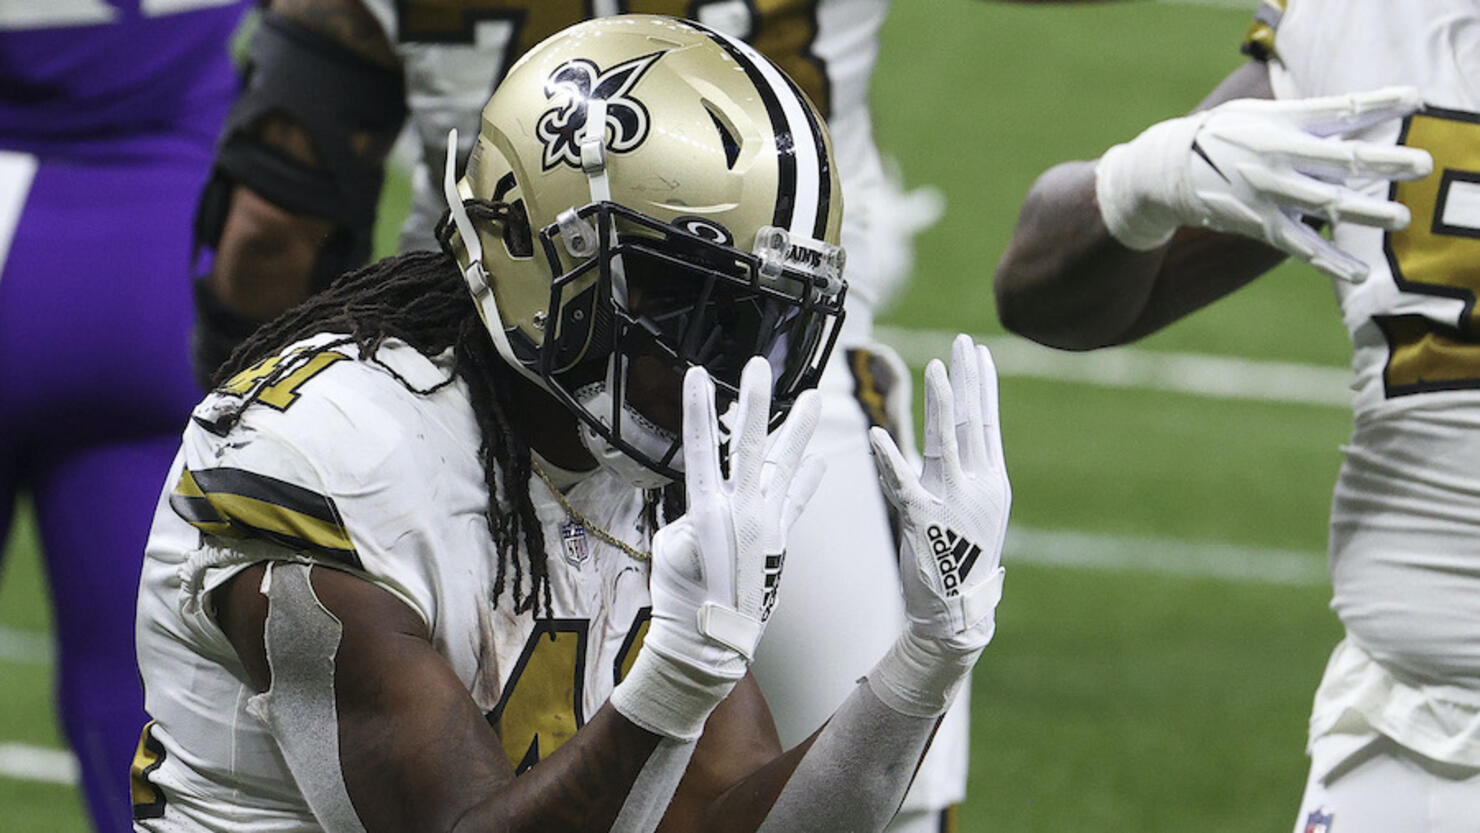 Alvin Kamara ties NFL record with 6 touchdowns in Saints win